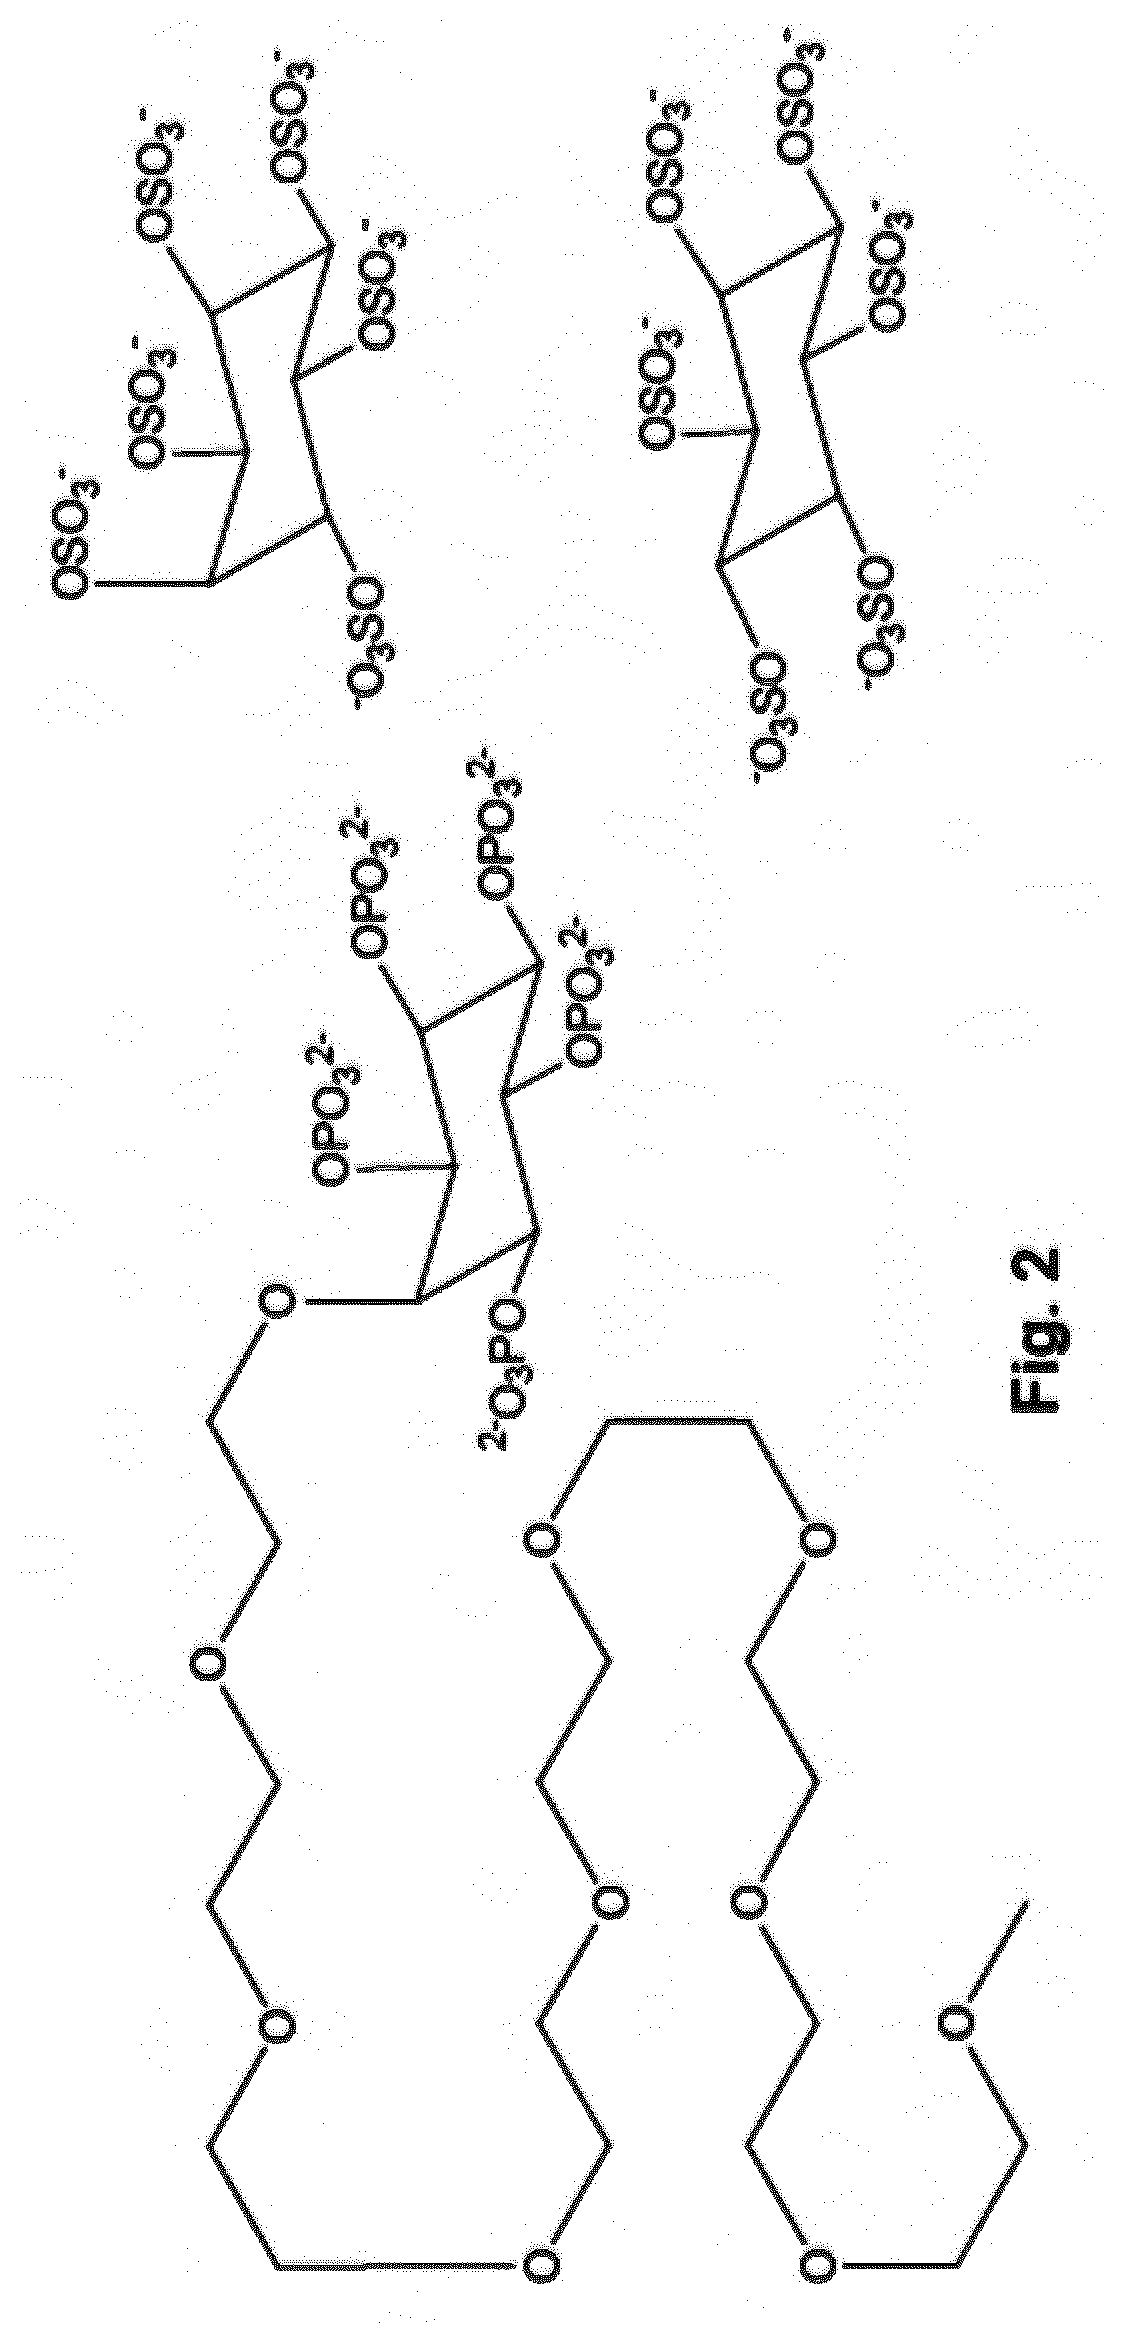 Inositol phosphate compounds for use in treating, inhibiting the progression, or preventing cardiovascula calcification